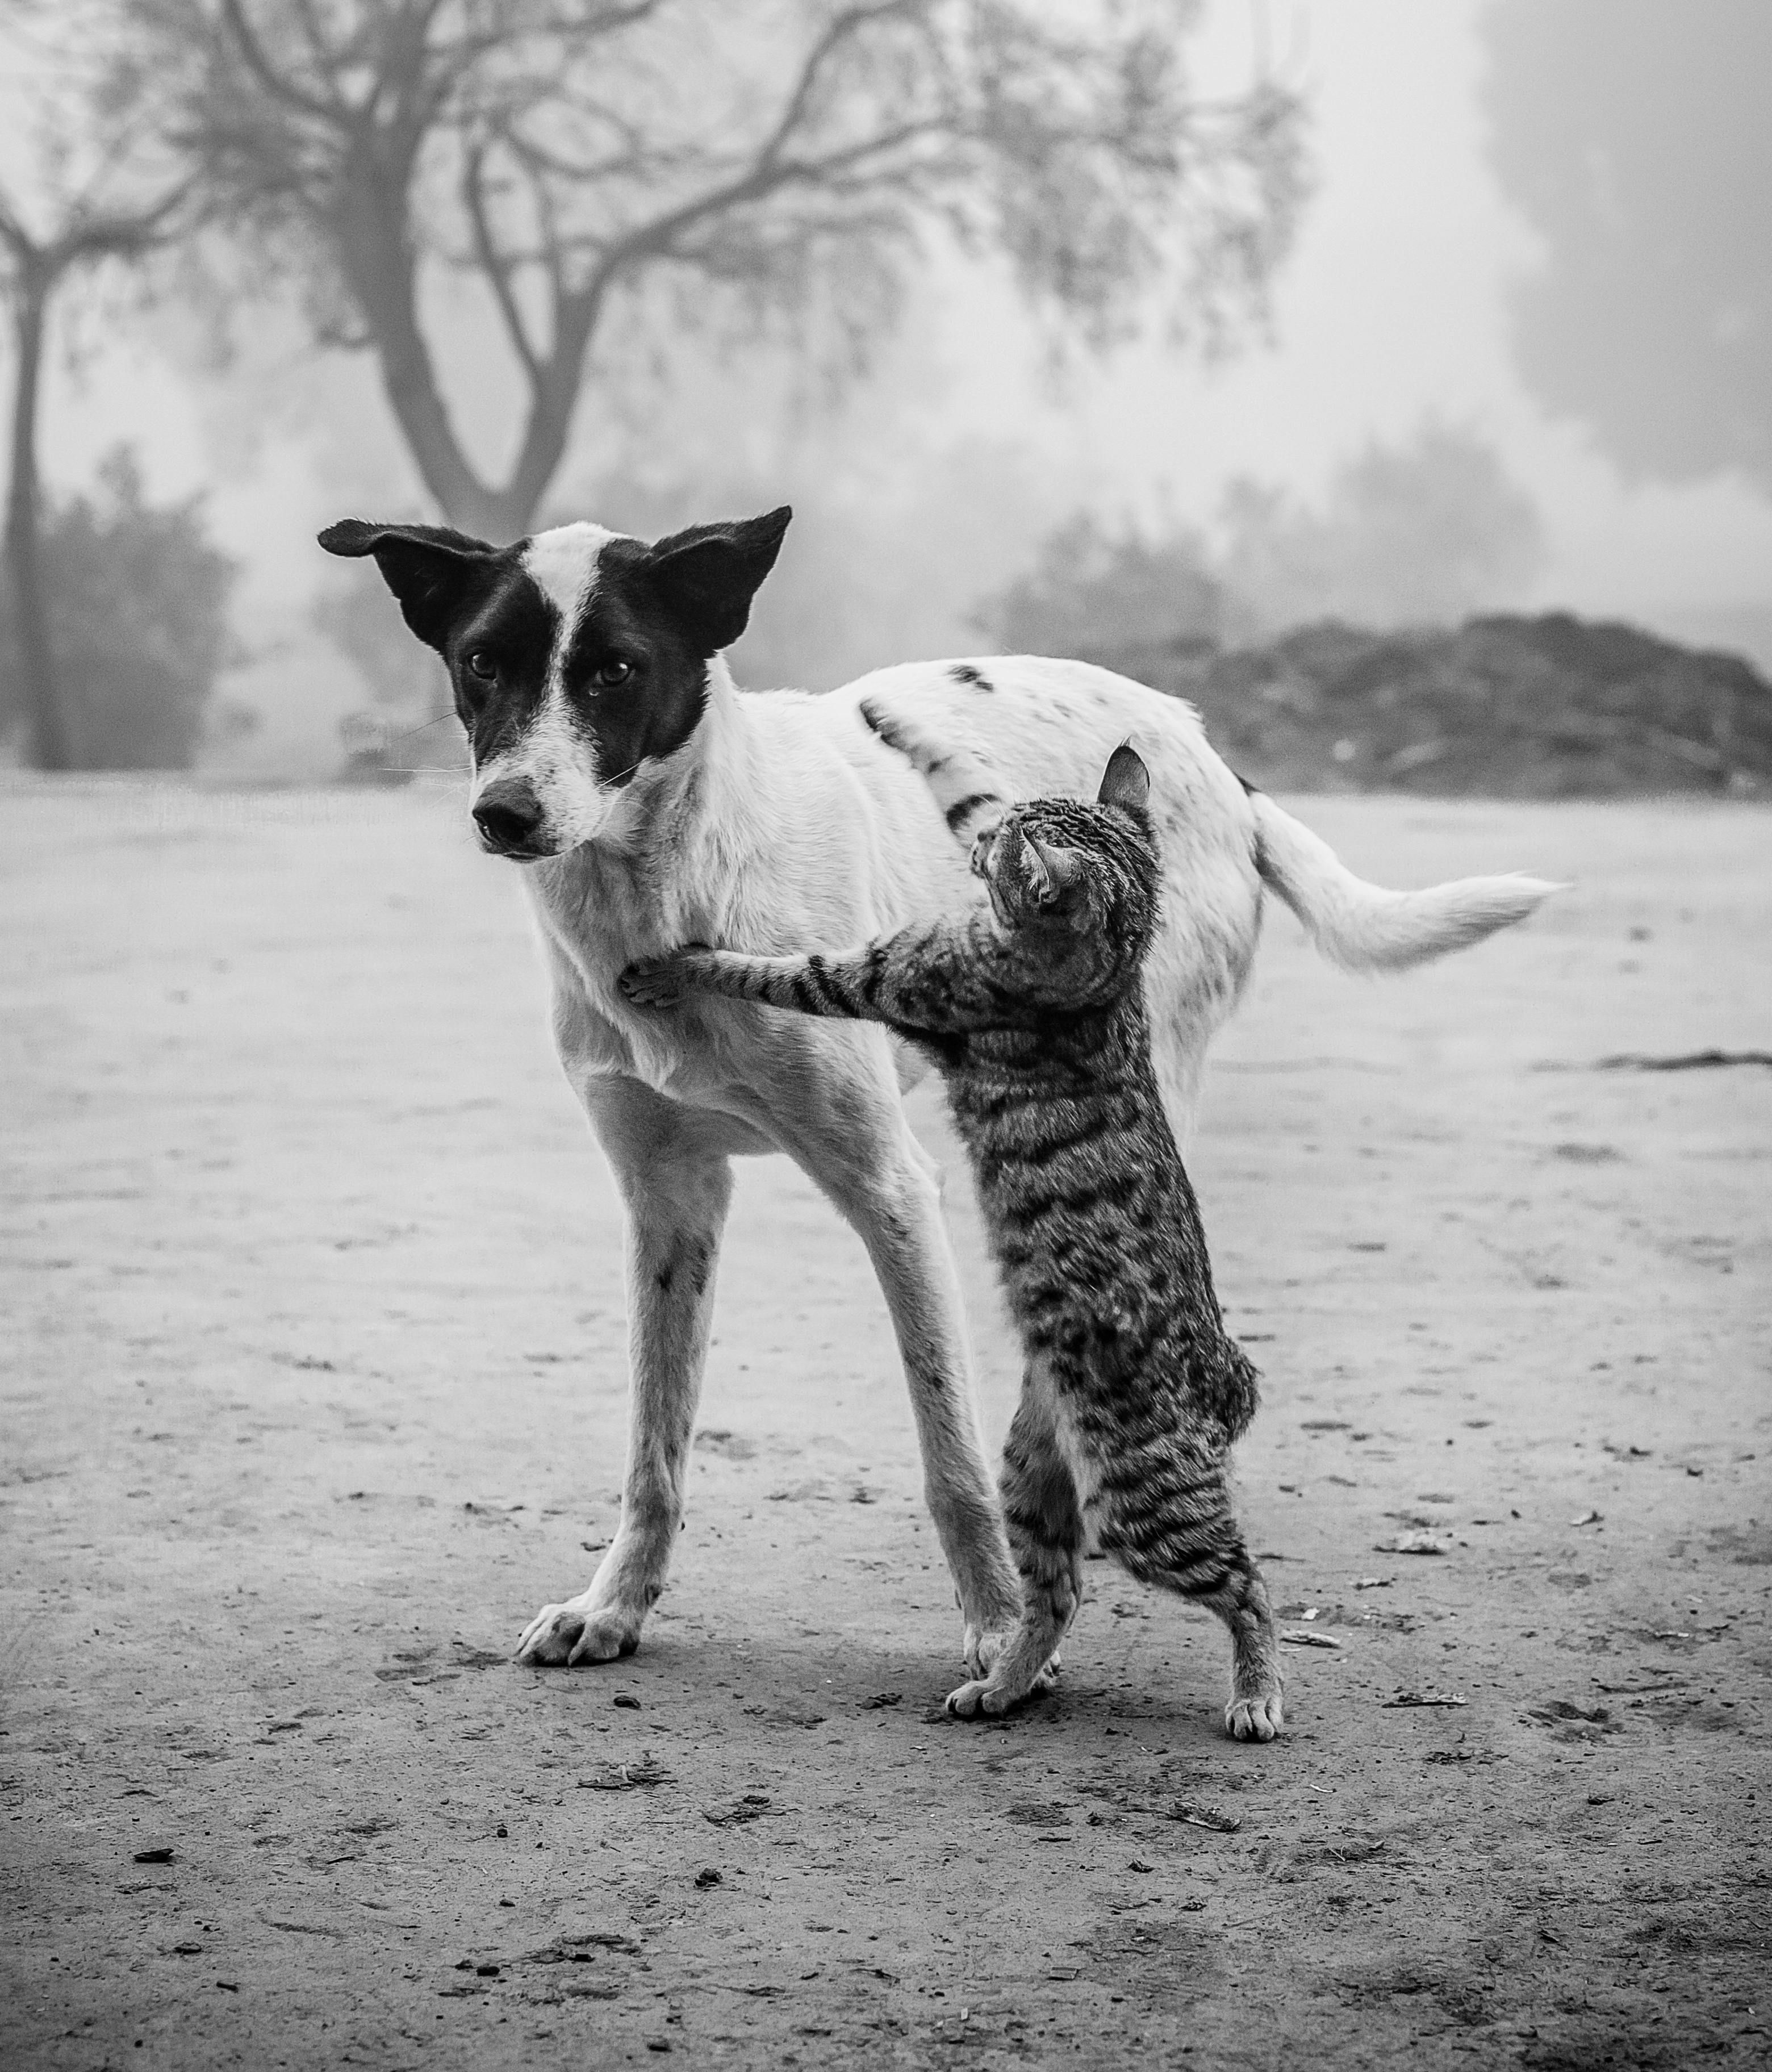 Cat And Dog Together Photos, Download The BEST Free Cat And Dog ...